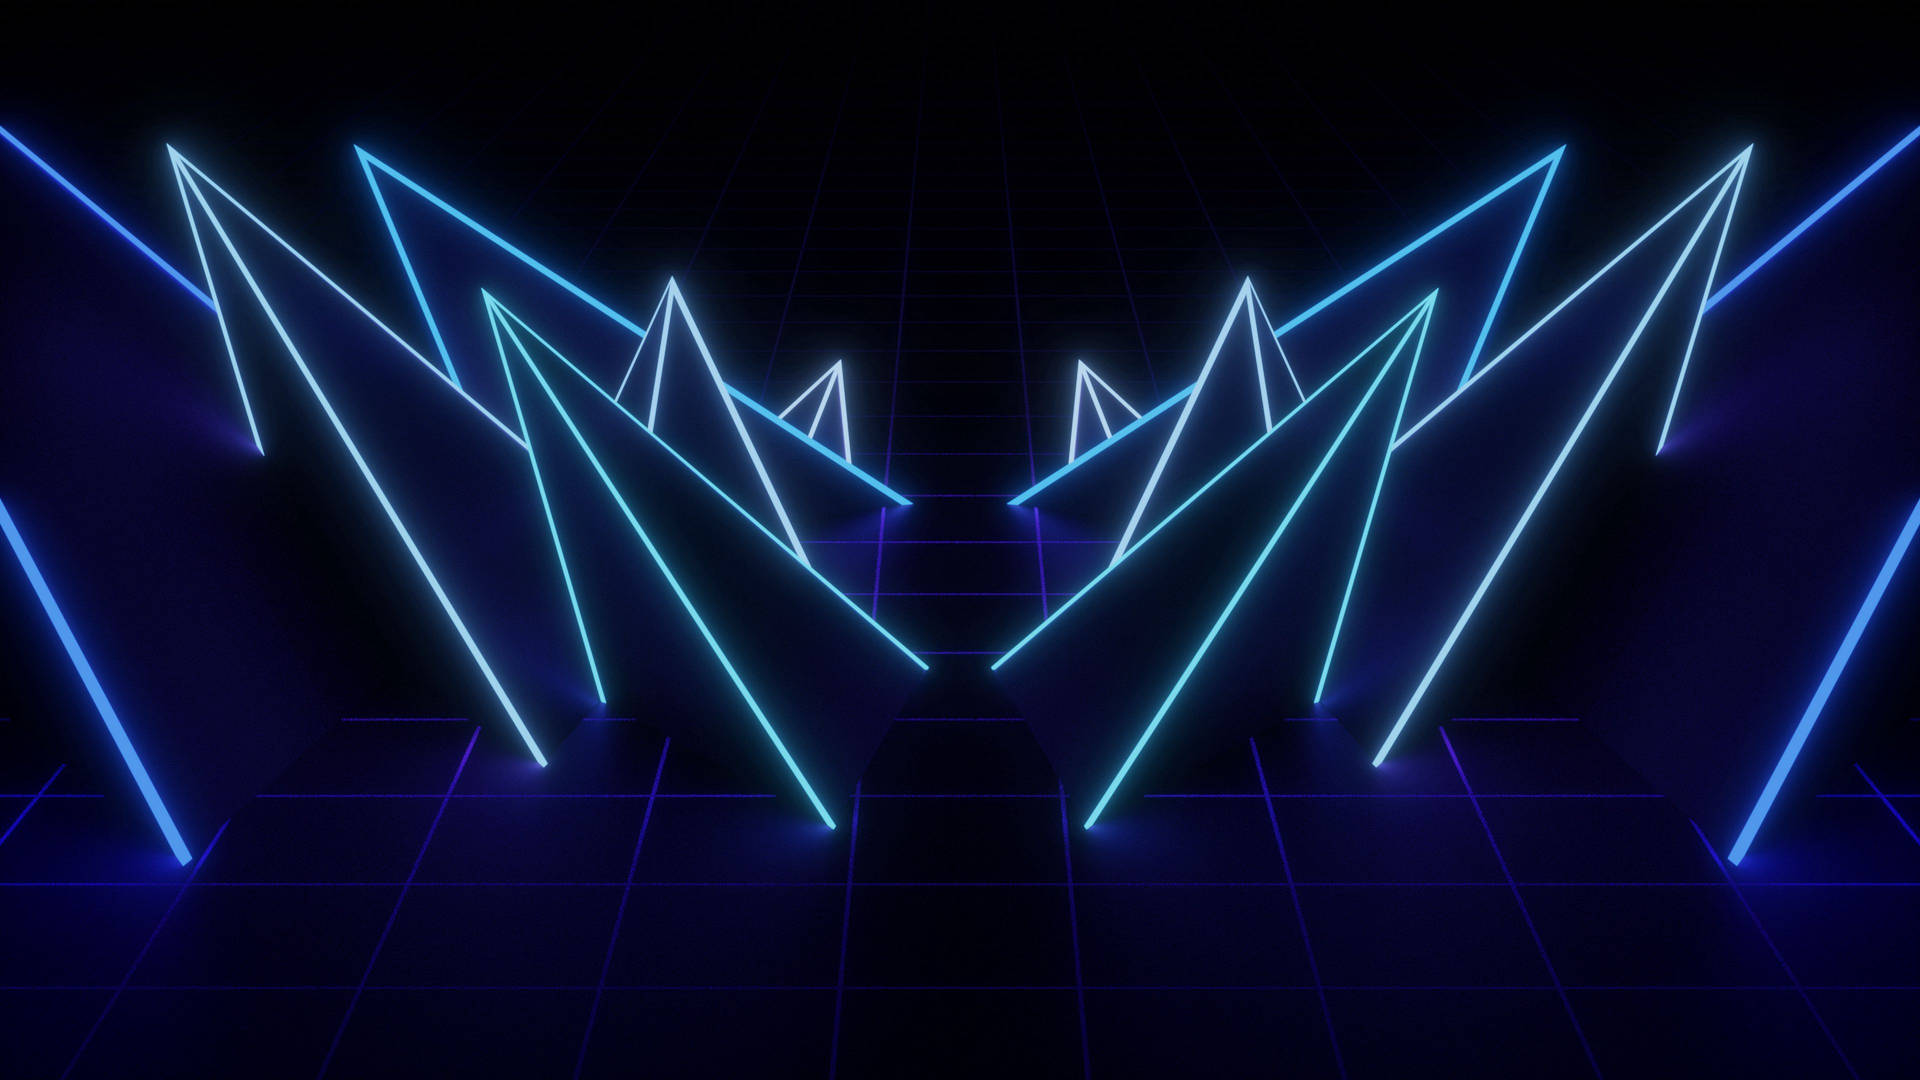 Dark Blue Aesthetic Glowing Triangles Background